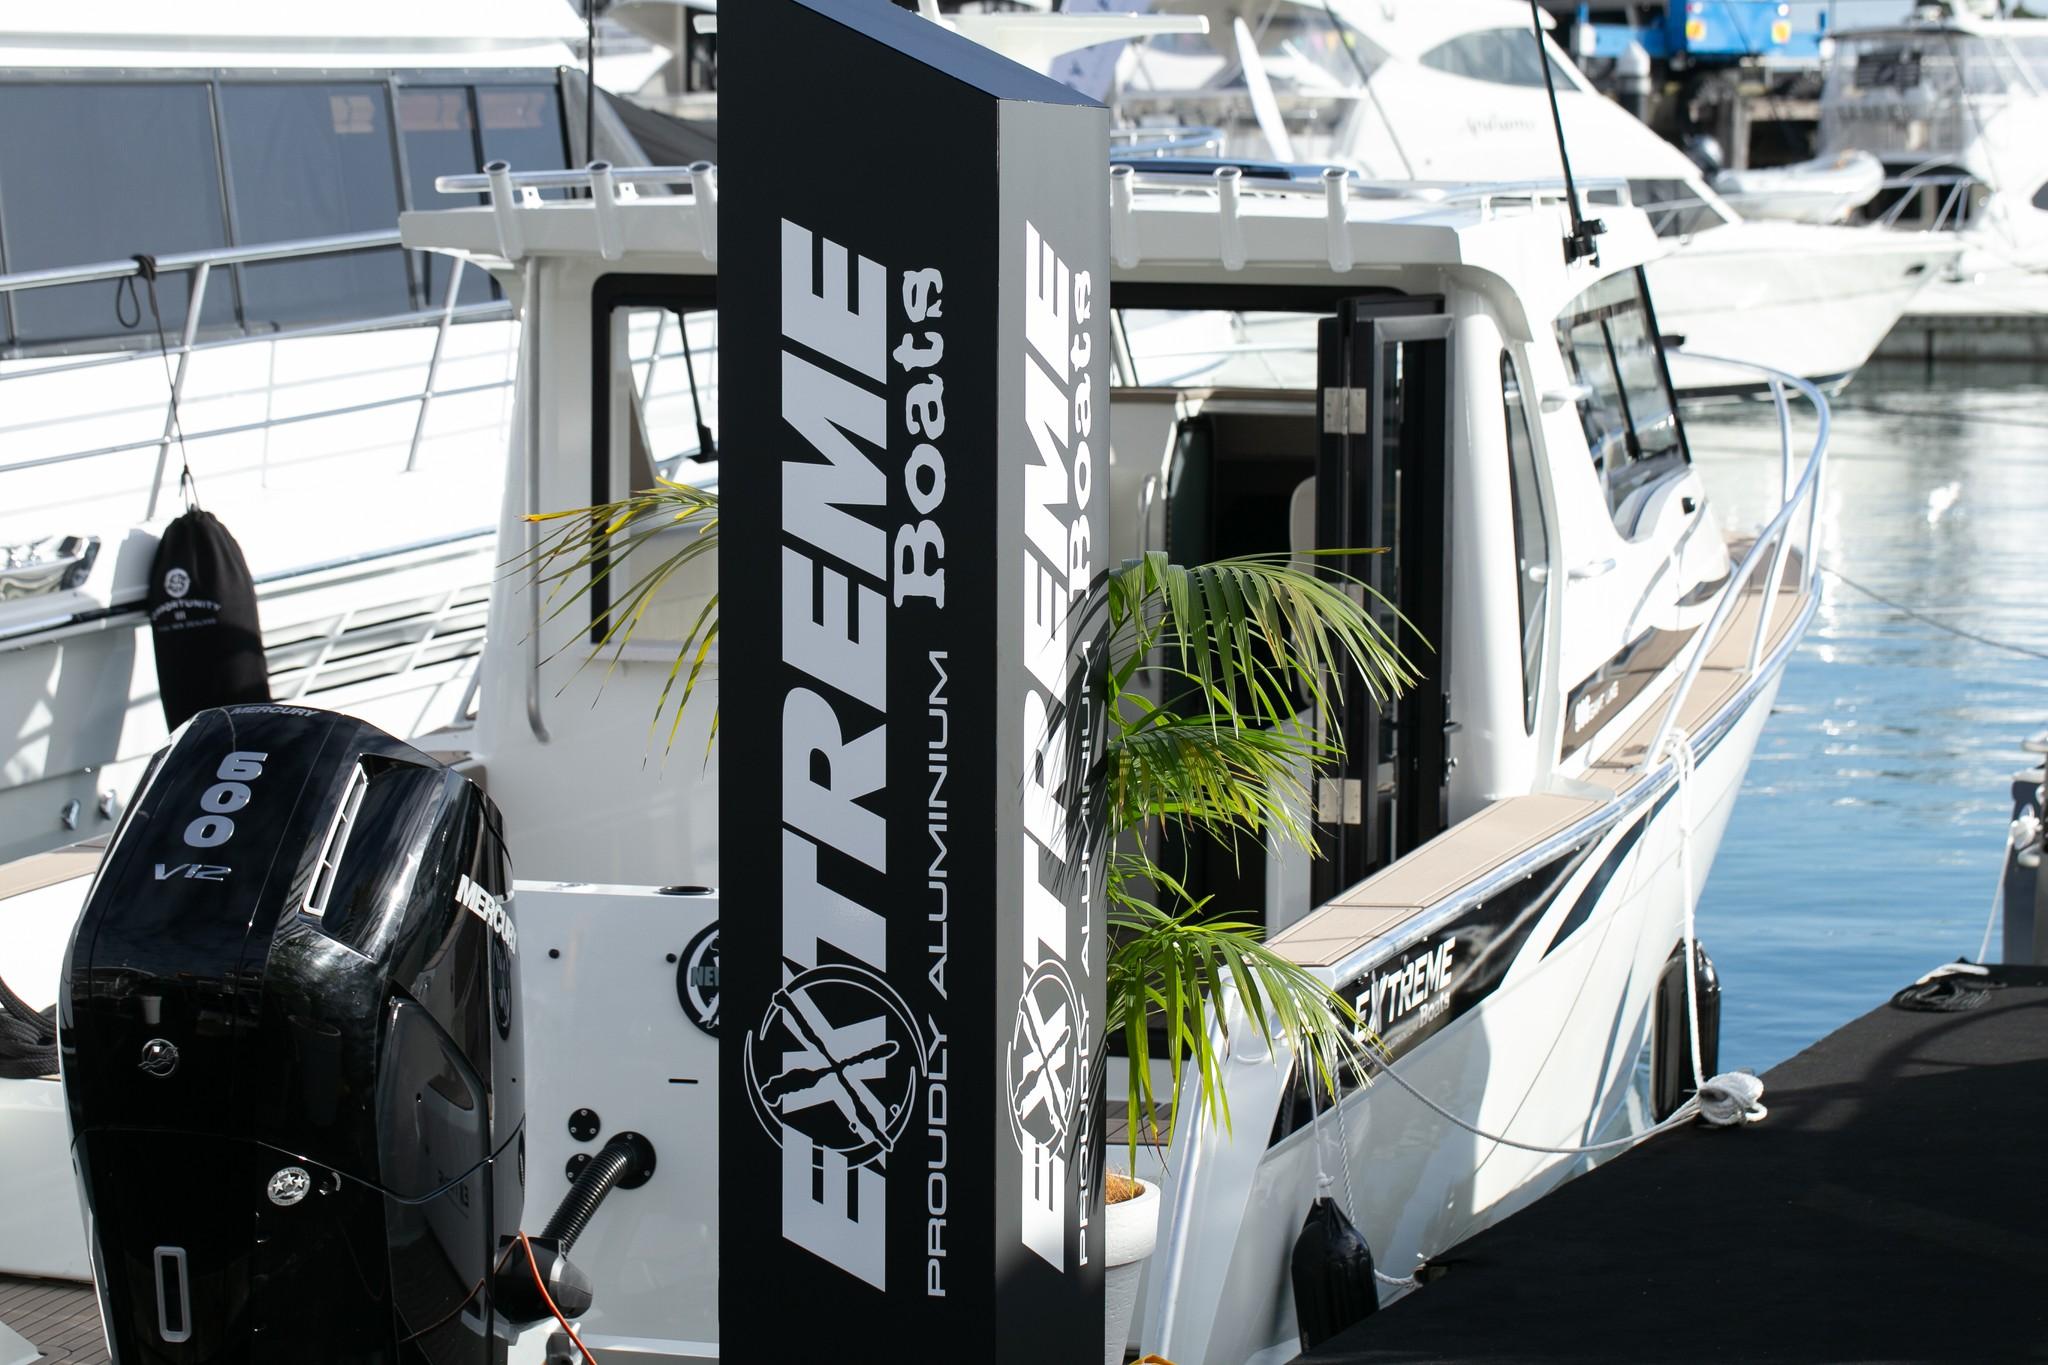 Extreme Boats 986 Game King 32' on Display at Boat Show 